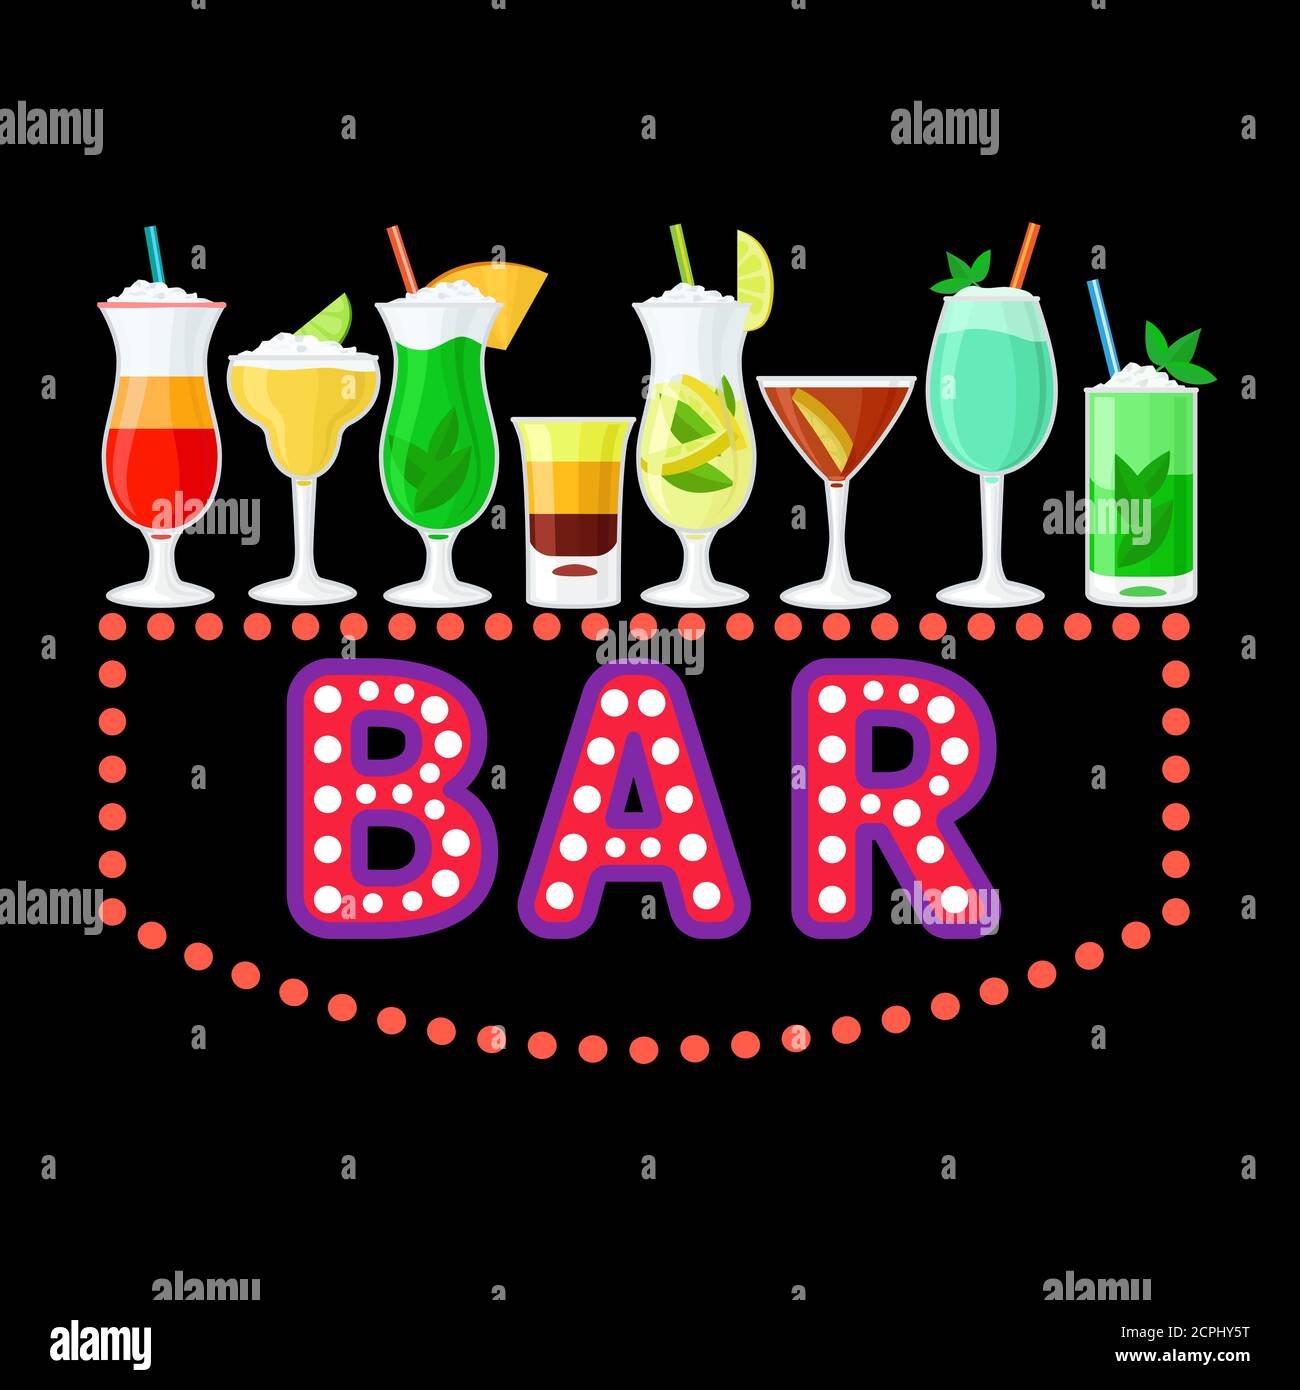 Neon bar sign with colorful cocktails vector design. Illustration of glowing alcohol banner Stock Vector